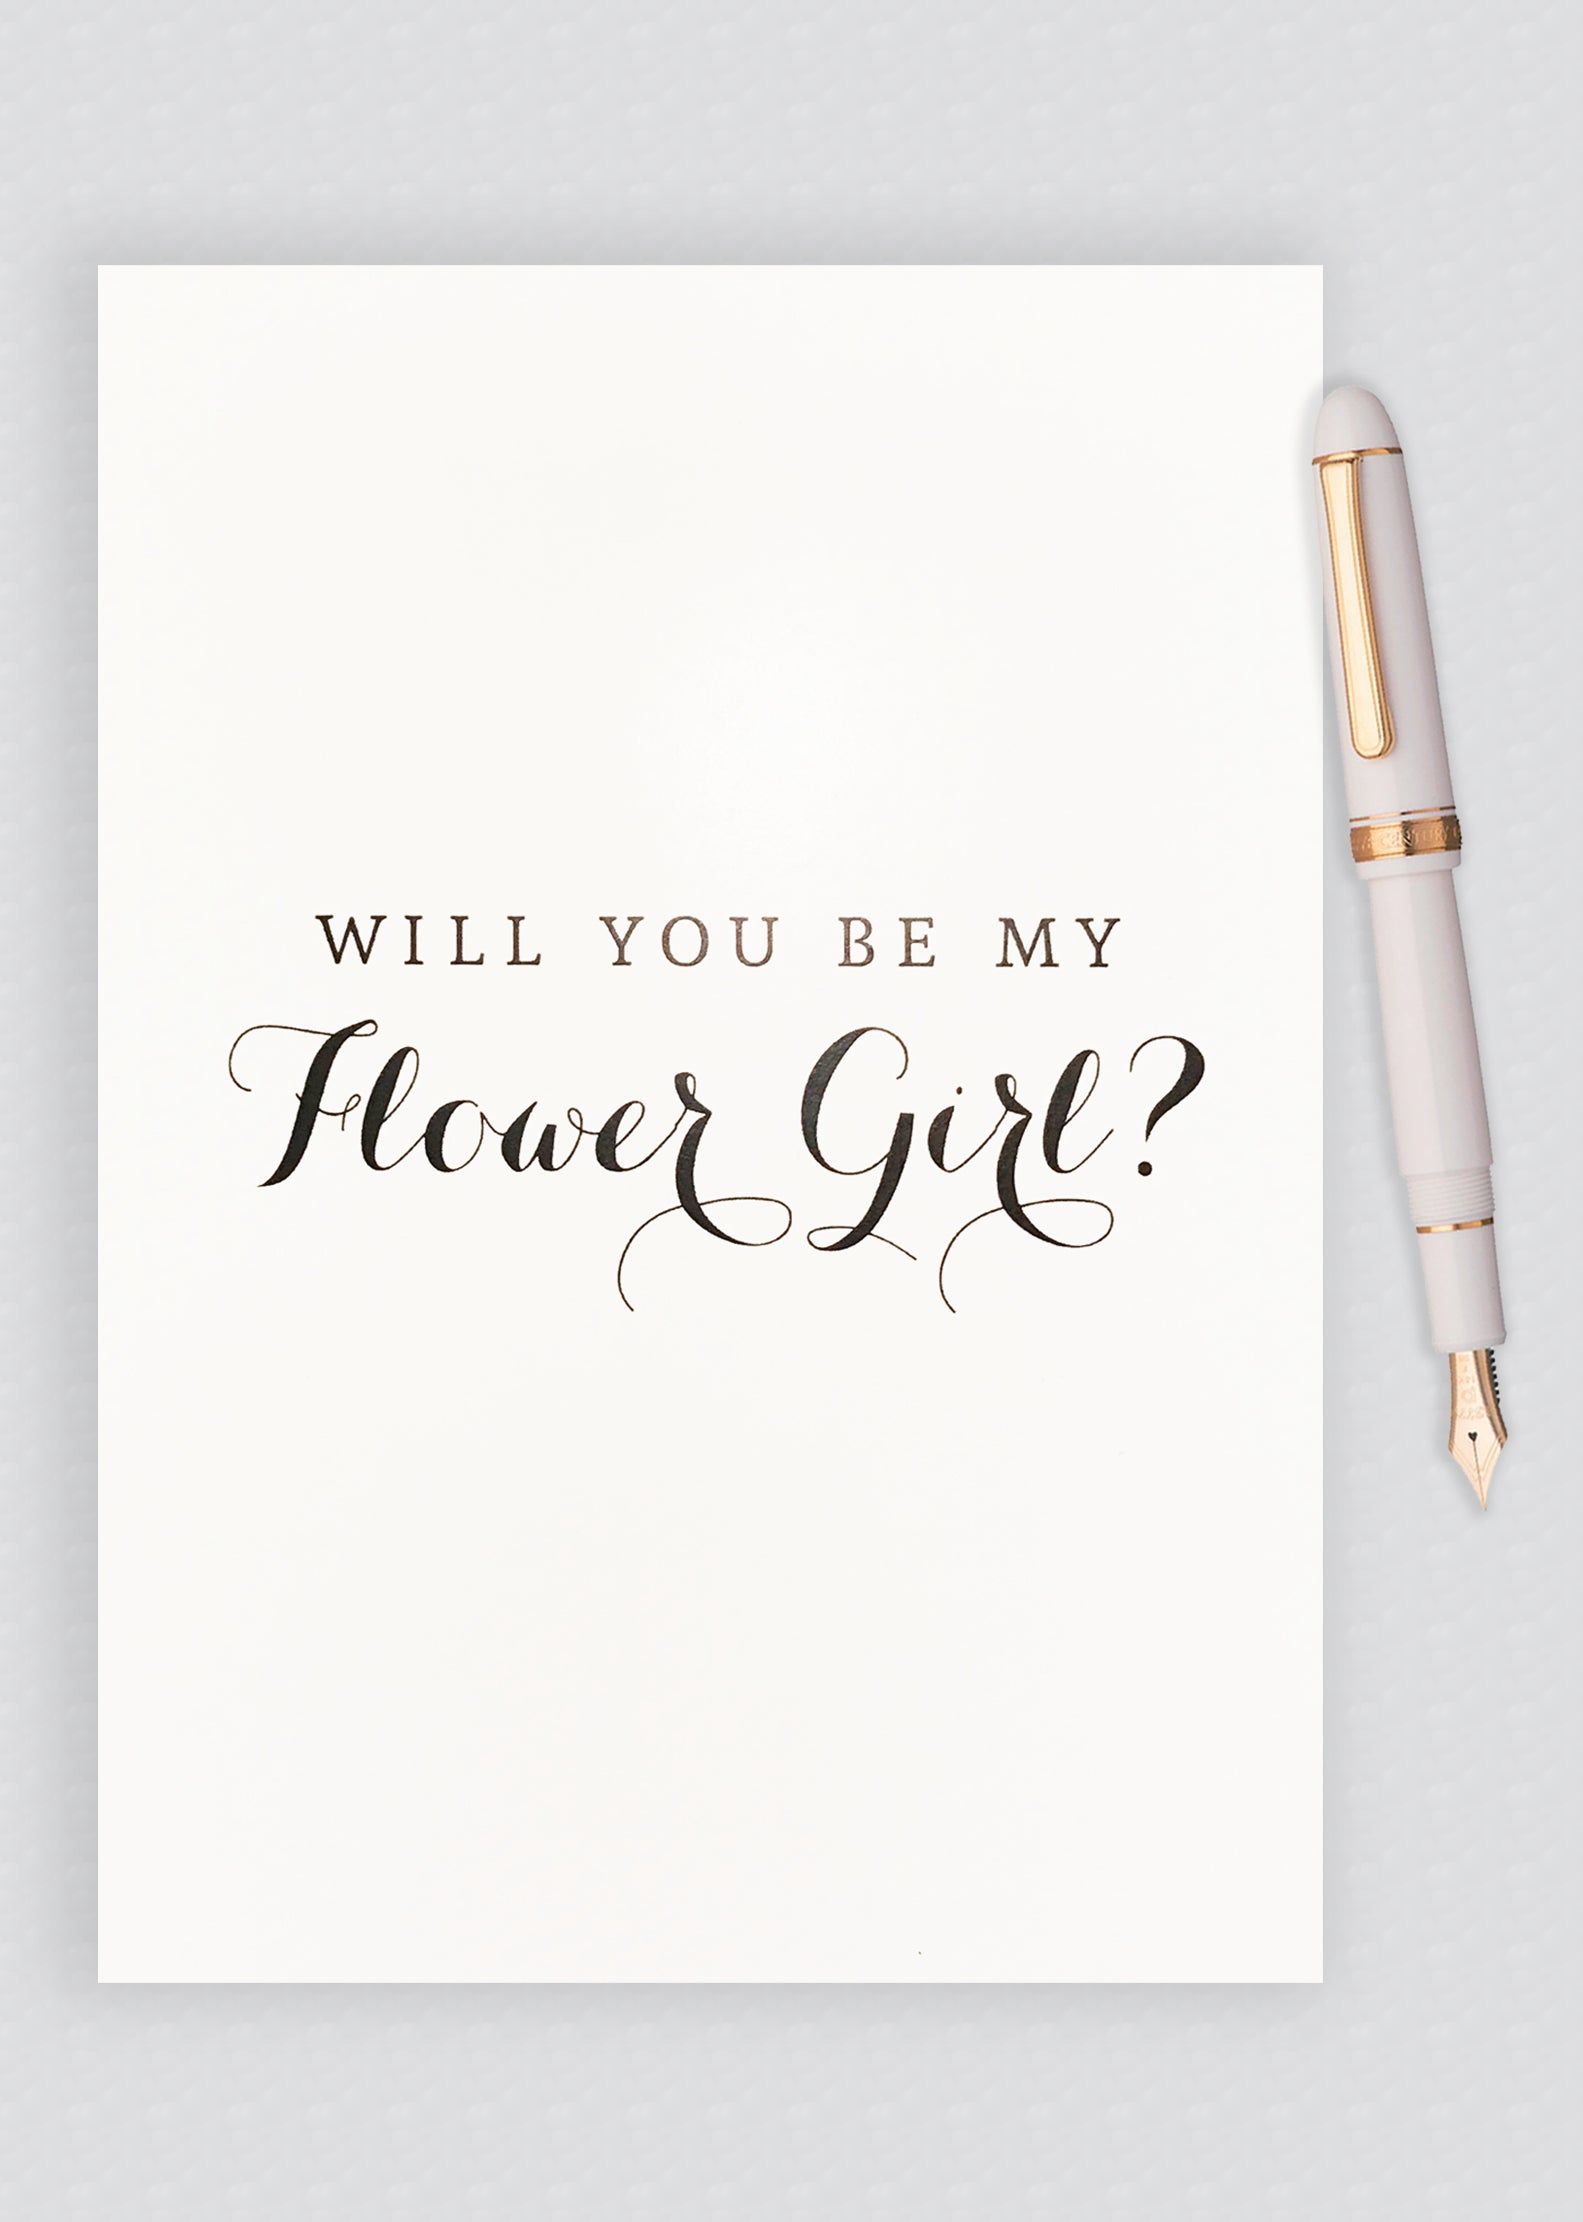 Will You Be My Flower Girl? Proposal Card - B